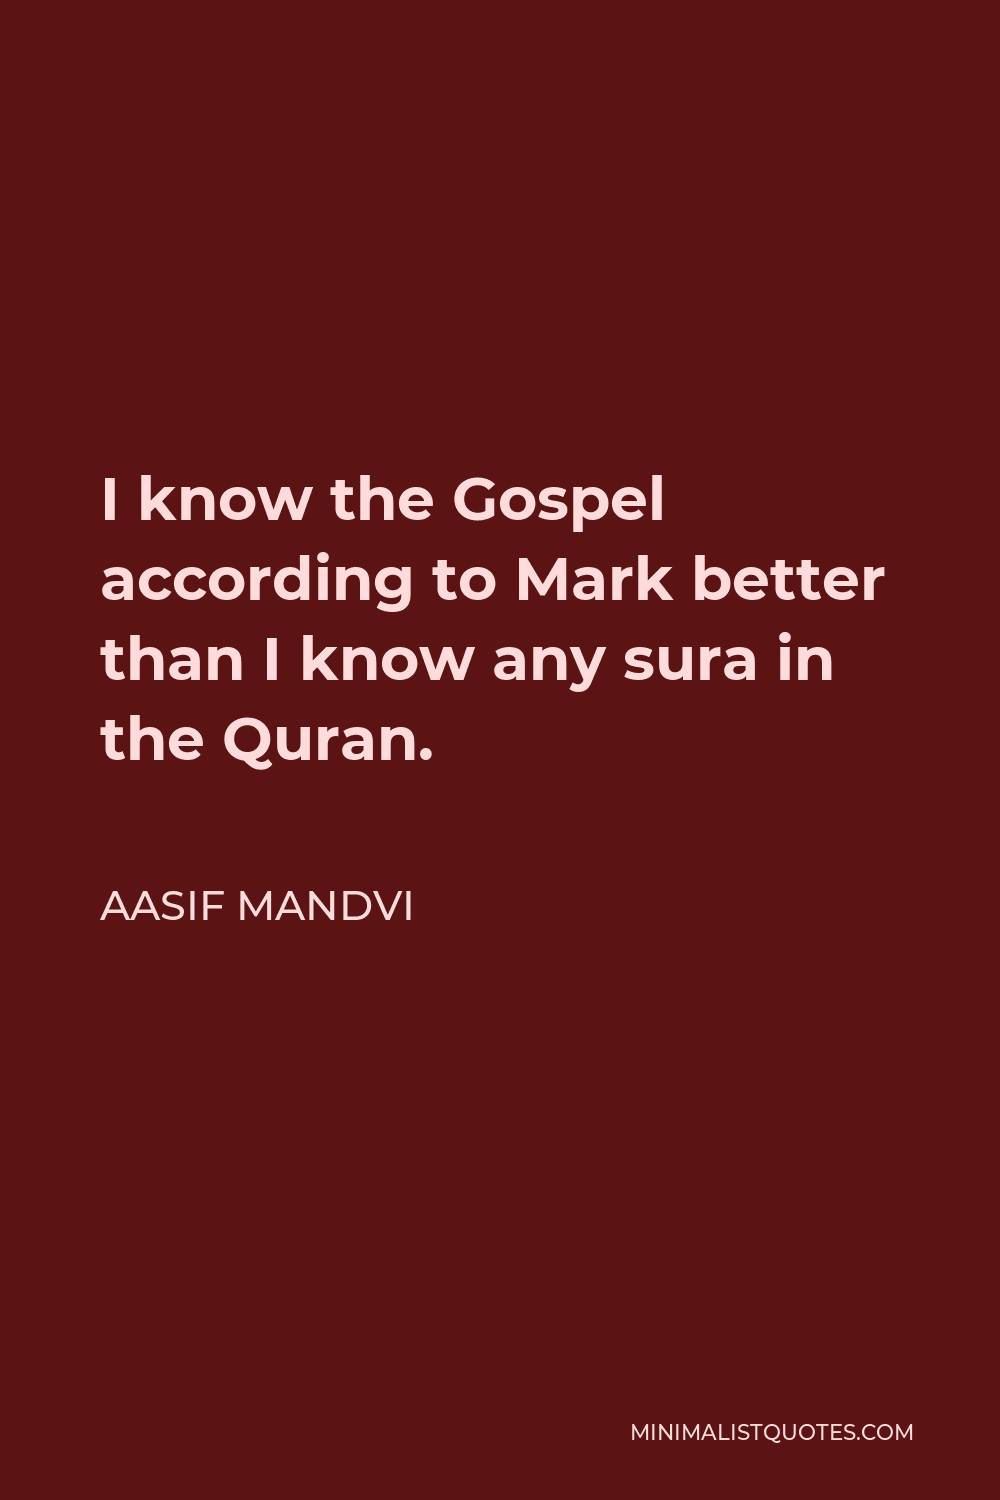 Aasif Mandvi Quote - I know the Gospel according to Mark better than I know any sura in the Quran.